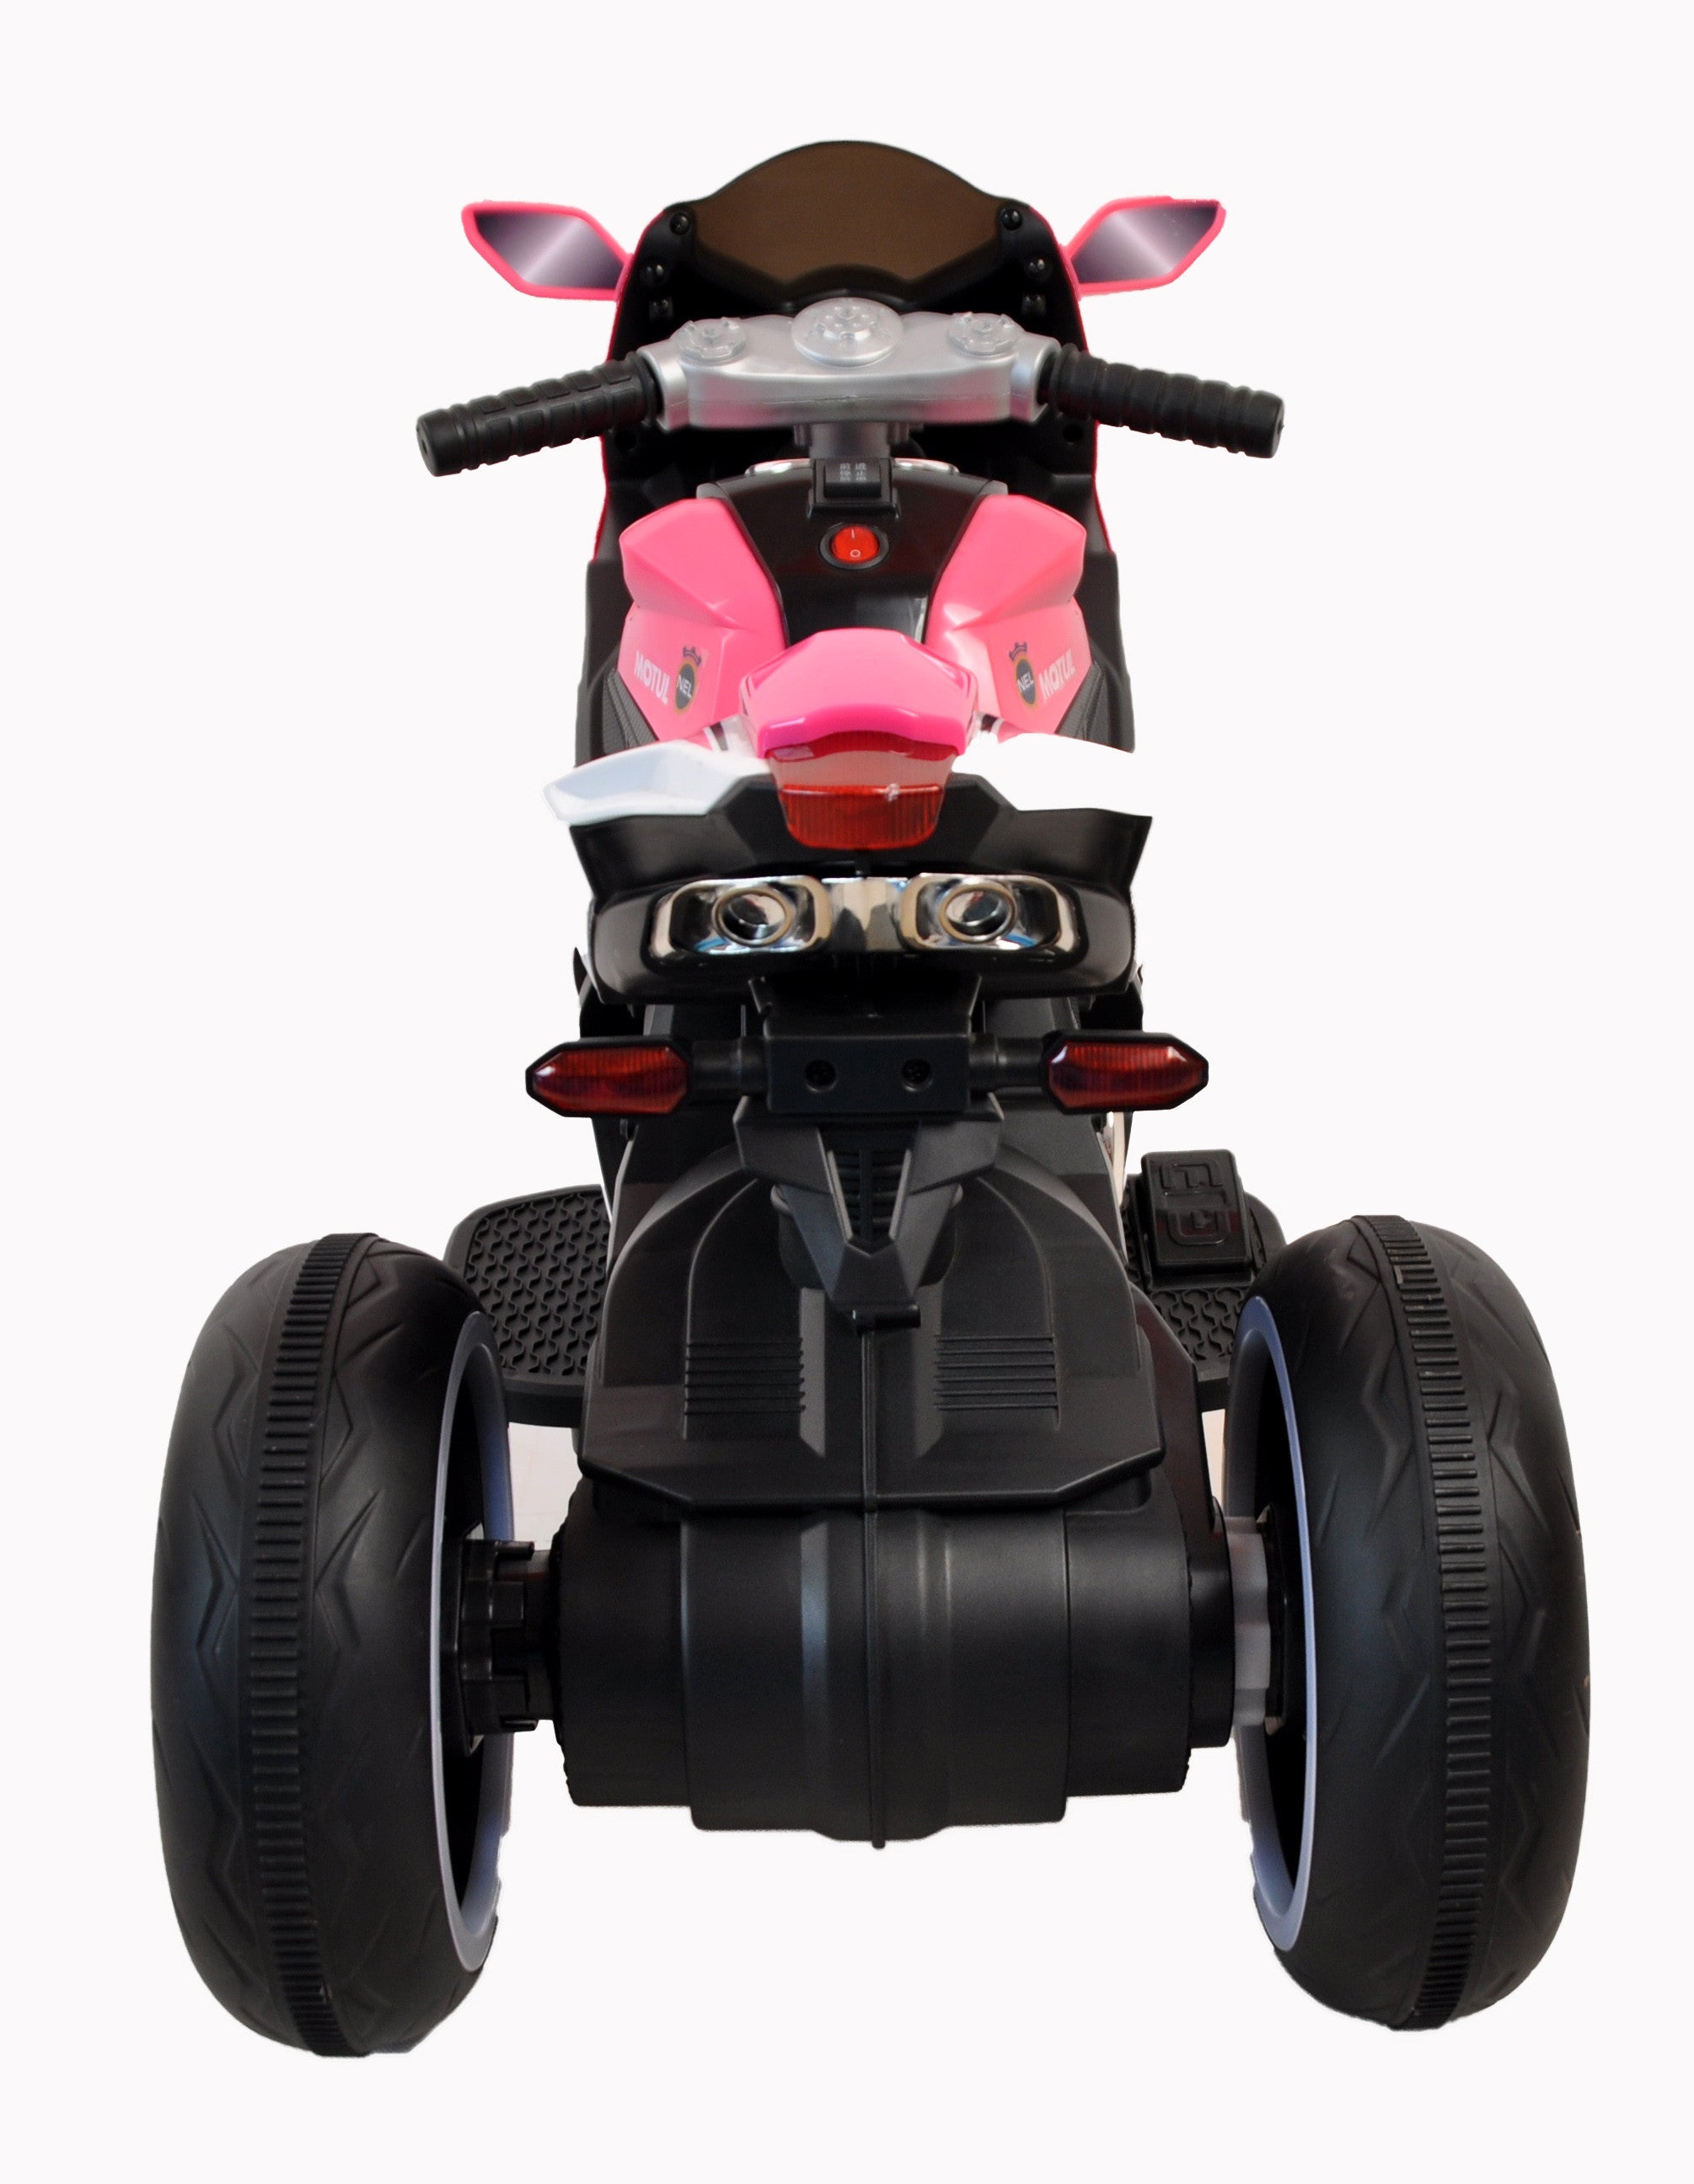 Tamco 6V Kids Electric motorcycle/ Cheap Kids toys motorcycle/Kids electric car/electric ride on motorcycle 3-4 years girl